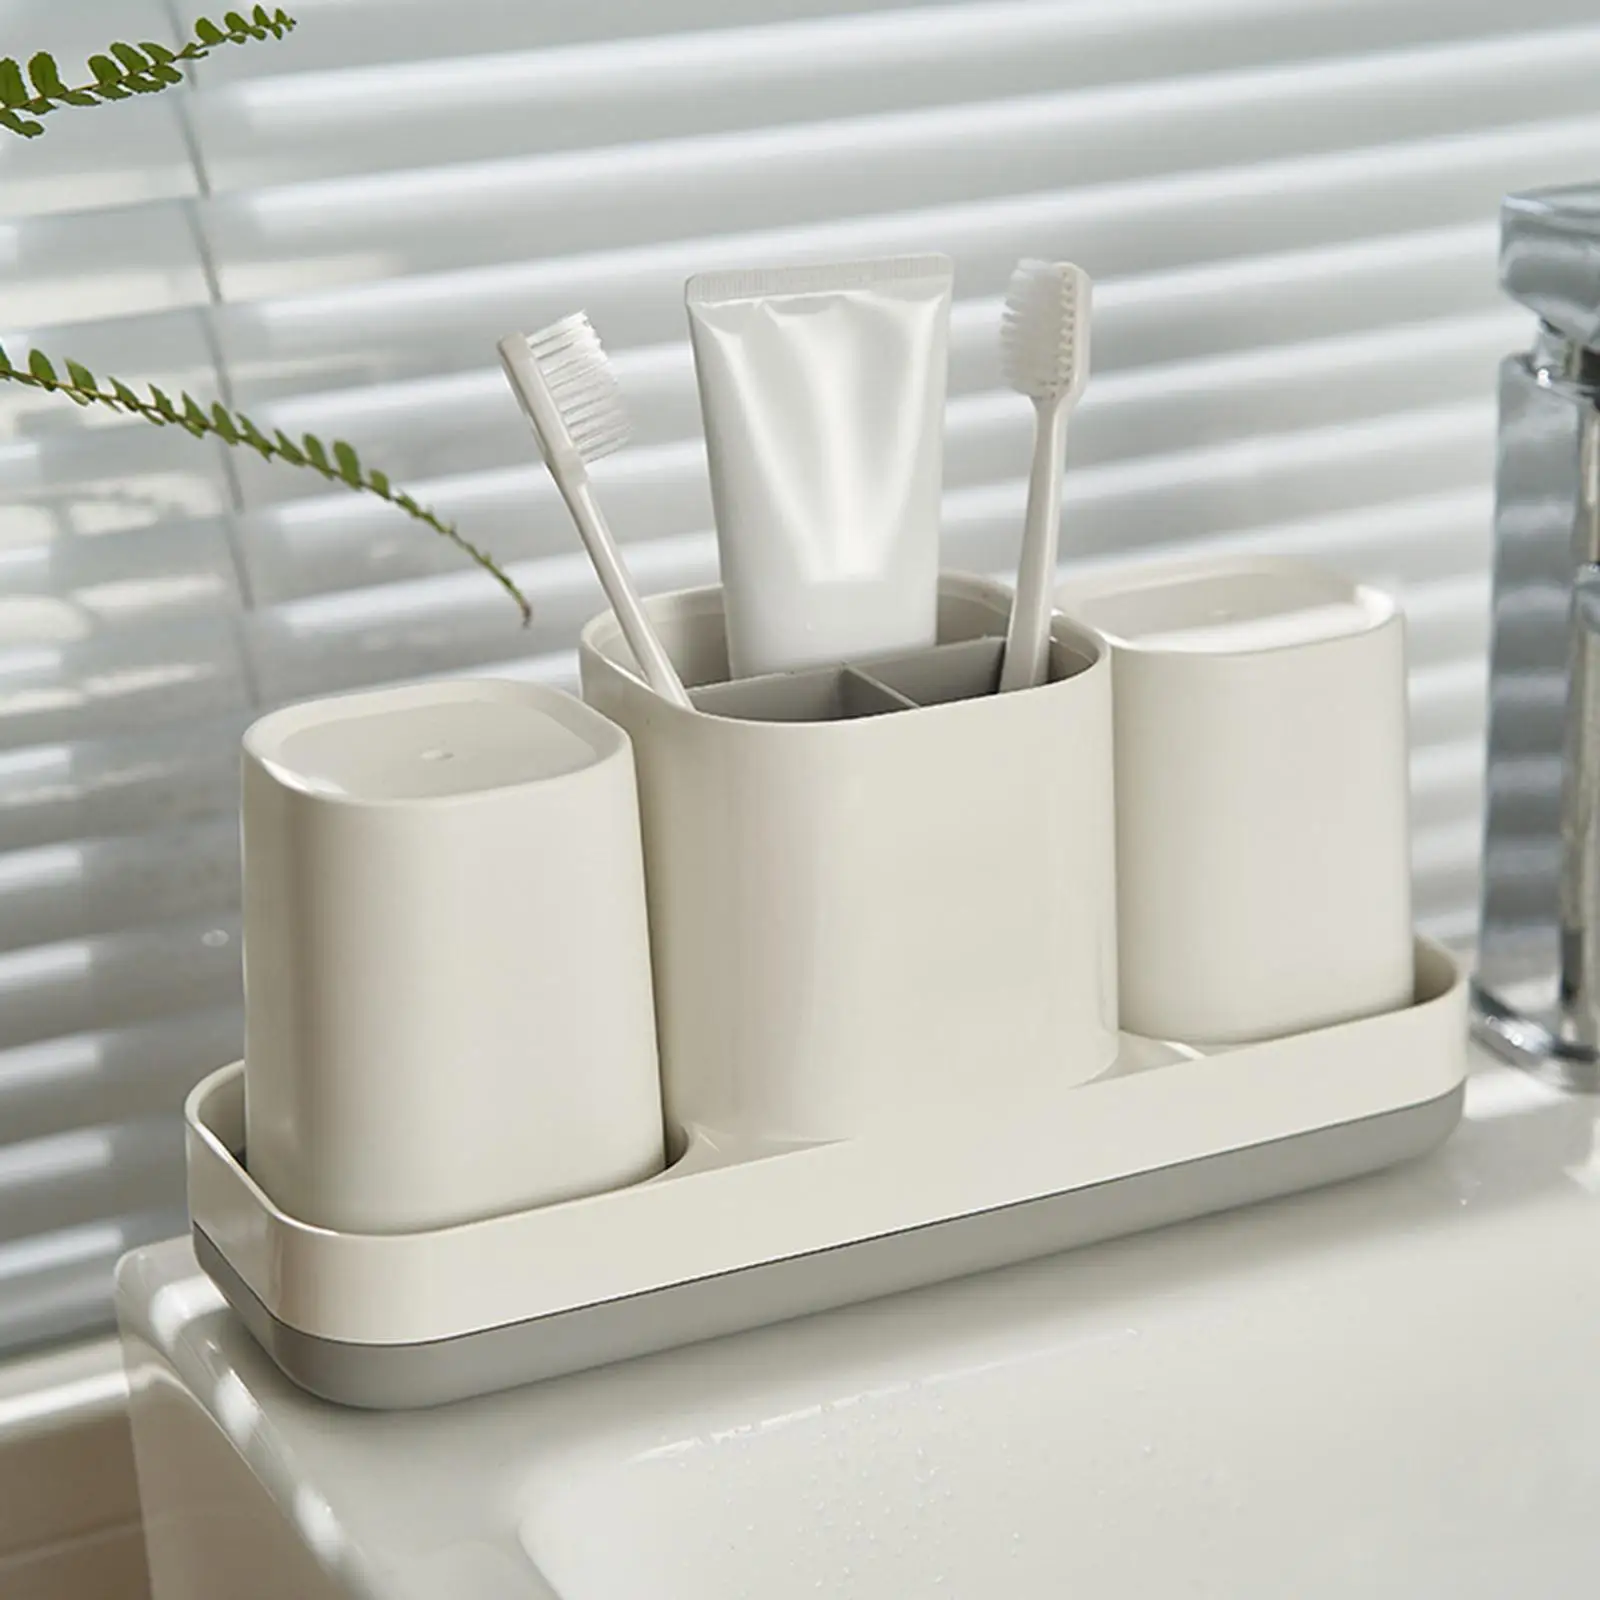 Bthroom Toothbrush Holder nd Grgle Cup Non Slip Bottom Cddy Countertop Lrge Dringe Try Skin Cre Bottle for Couple Kids